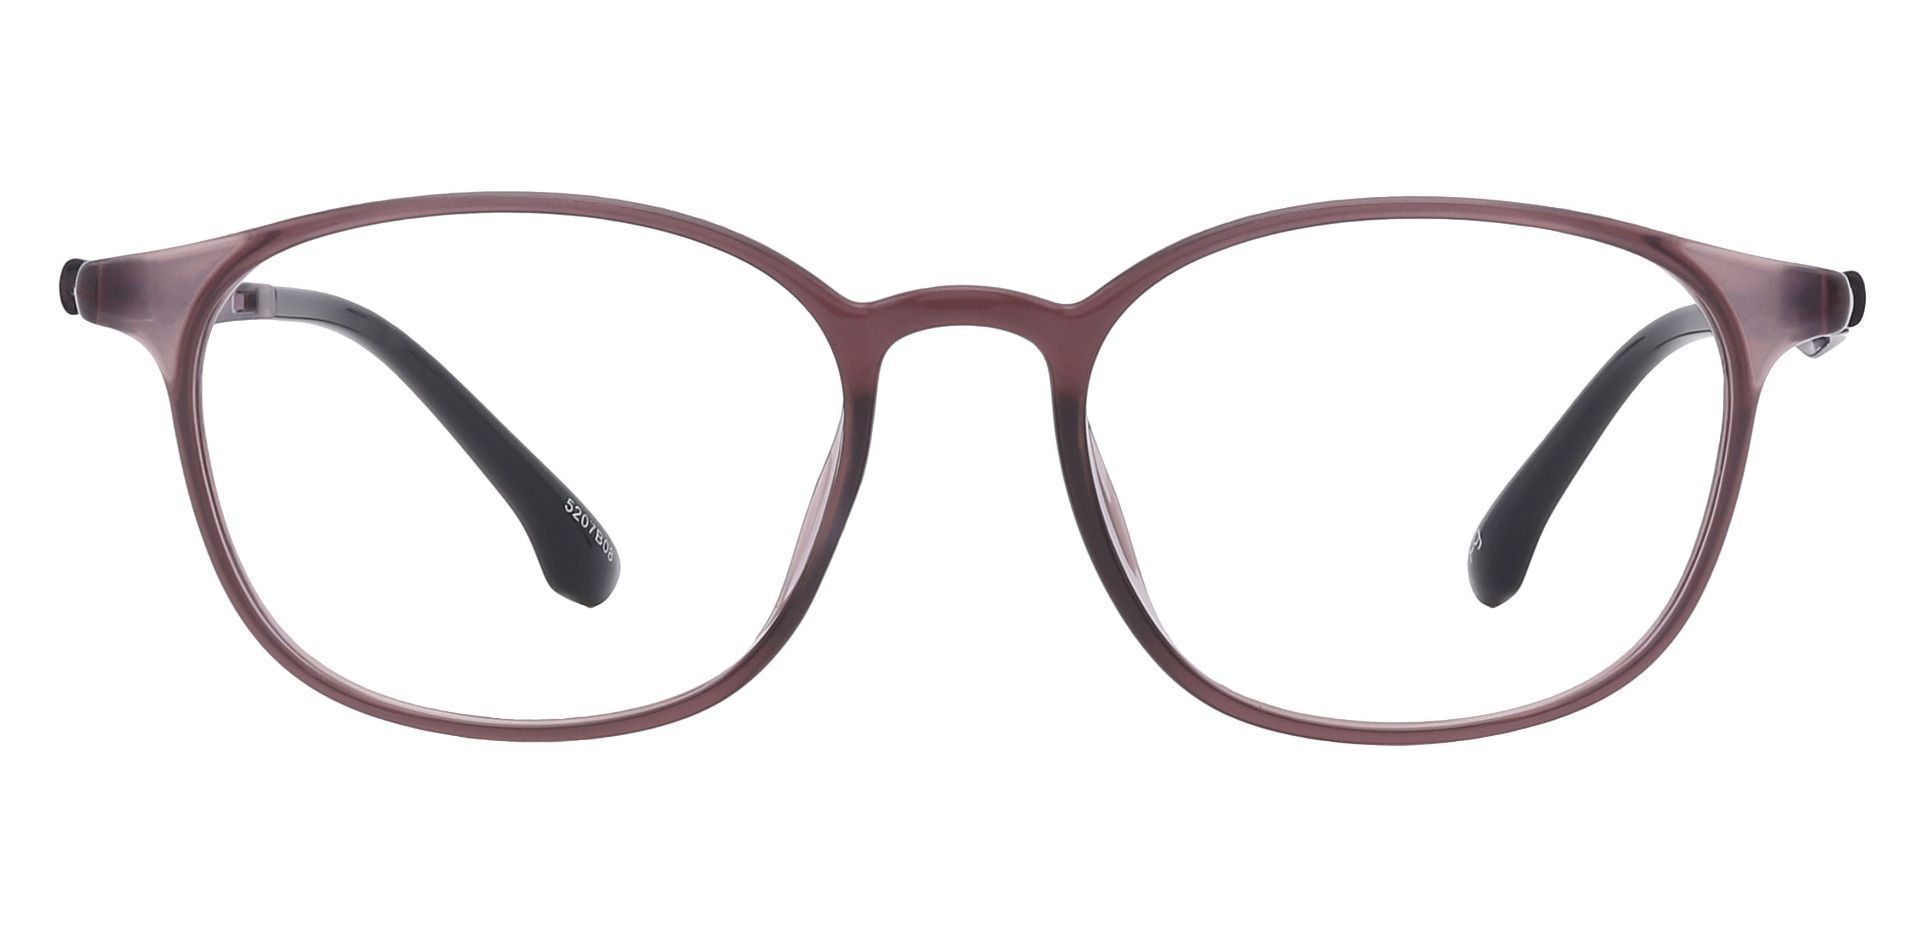 Shannon Oval Reading Glasses - Brown